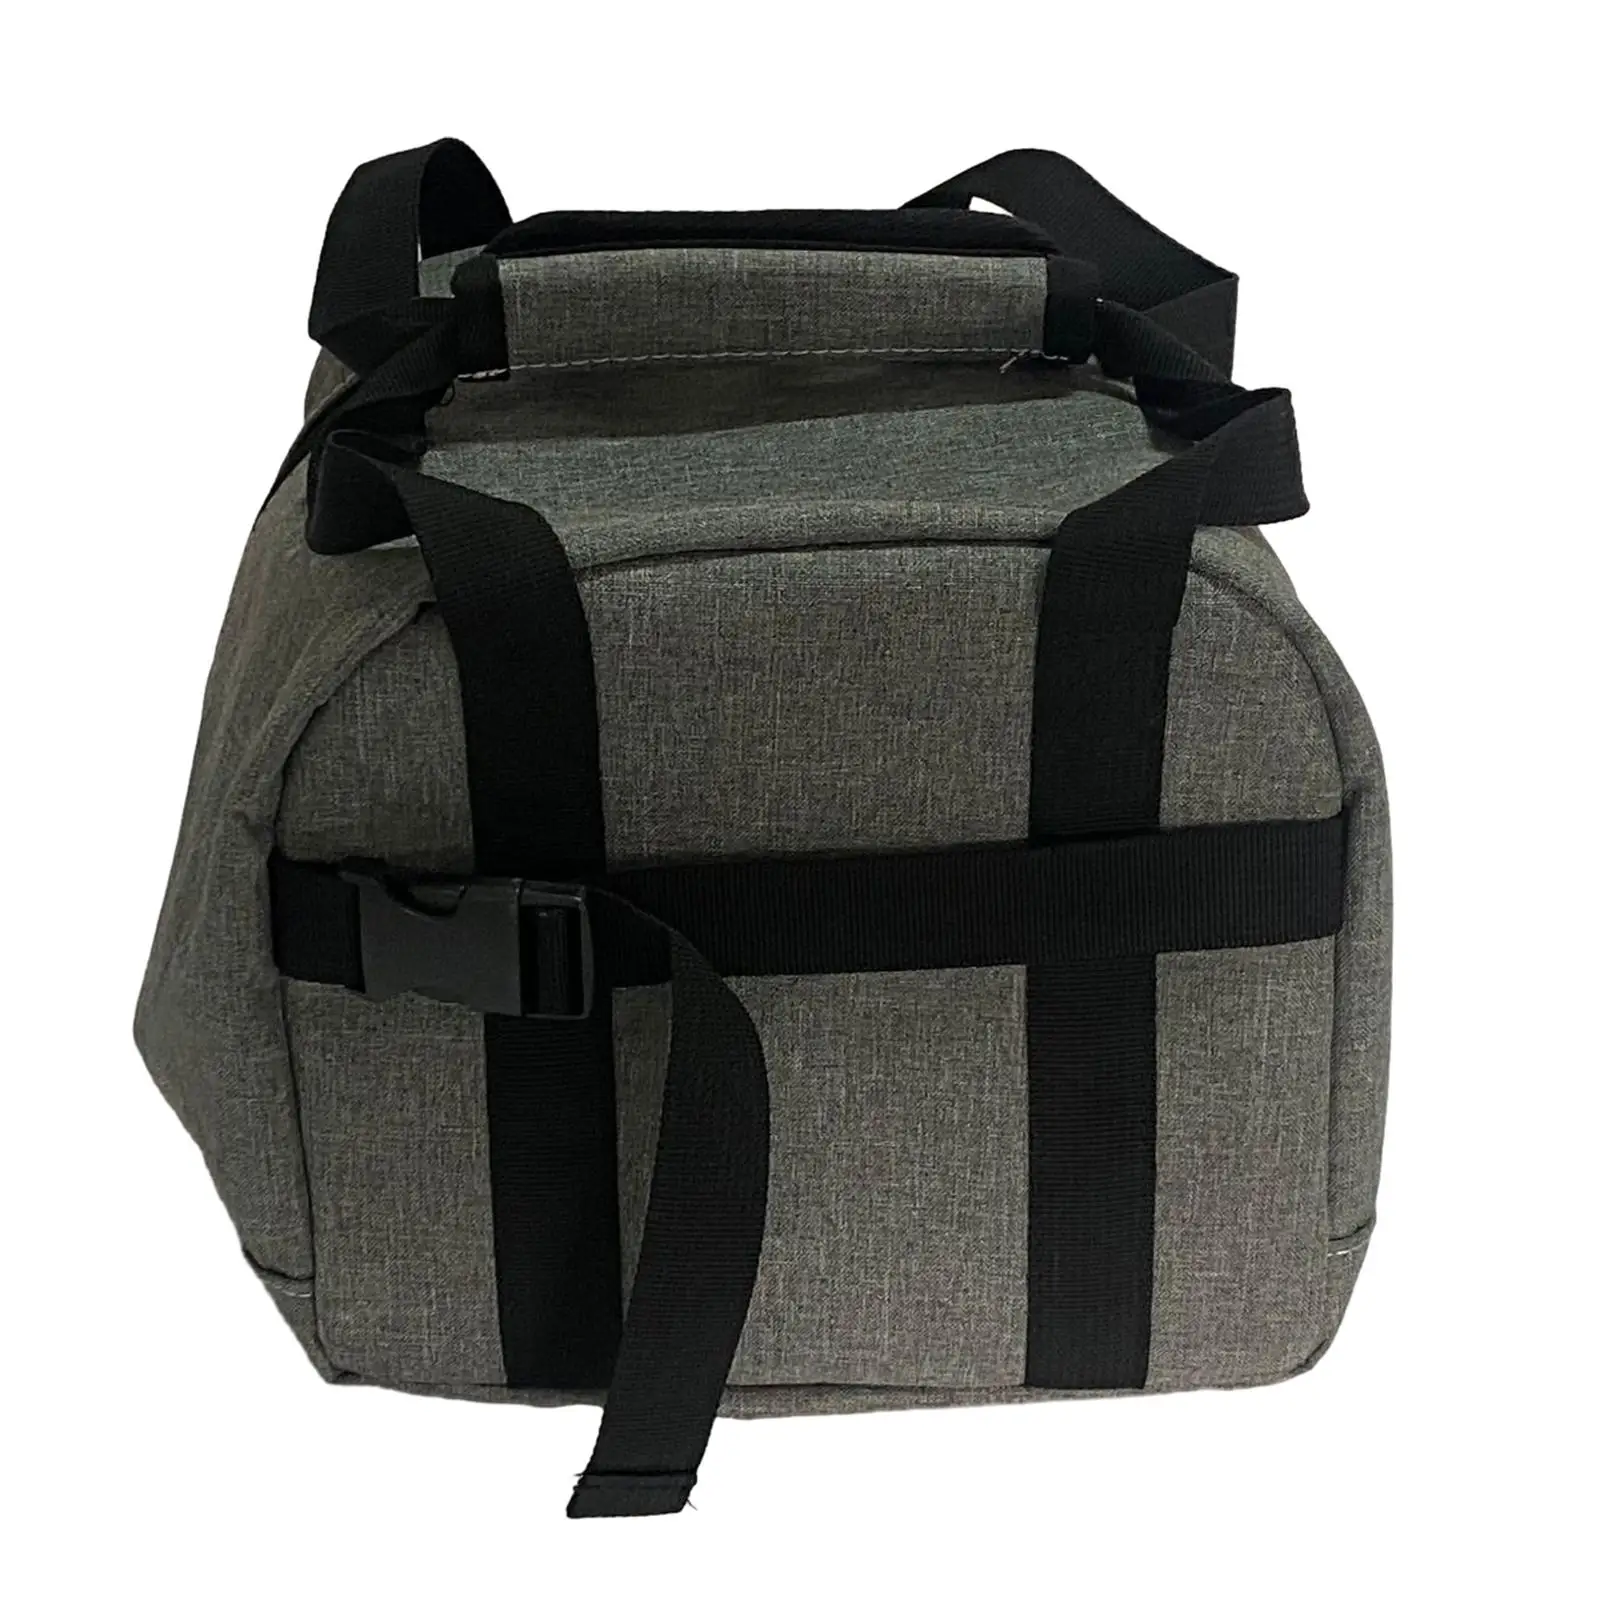 Single Bowling Ball Bag Adjustable Strap Oxford Fabric Durable with External